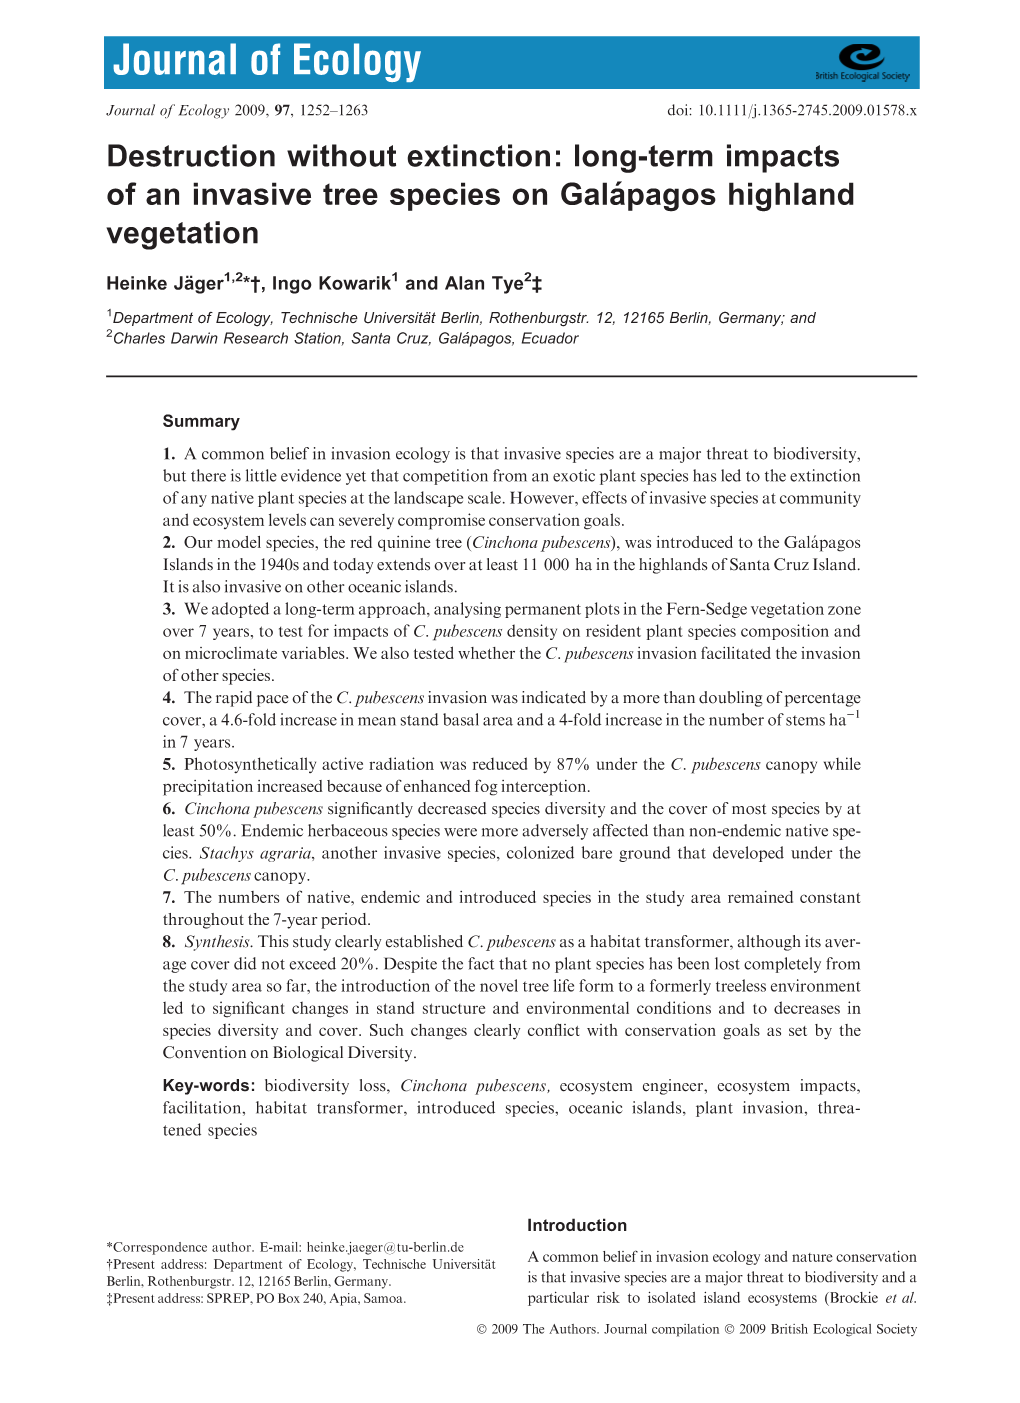 Long-Term Impacts of an Invasive Tree Species on Gala´Pagos Highland Vegetation